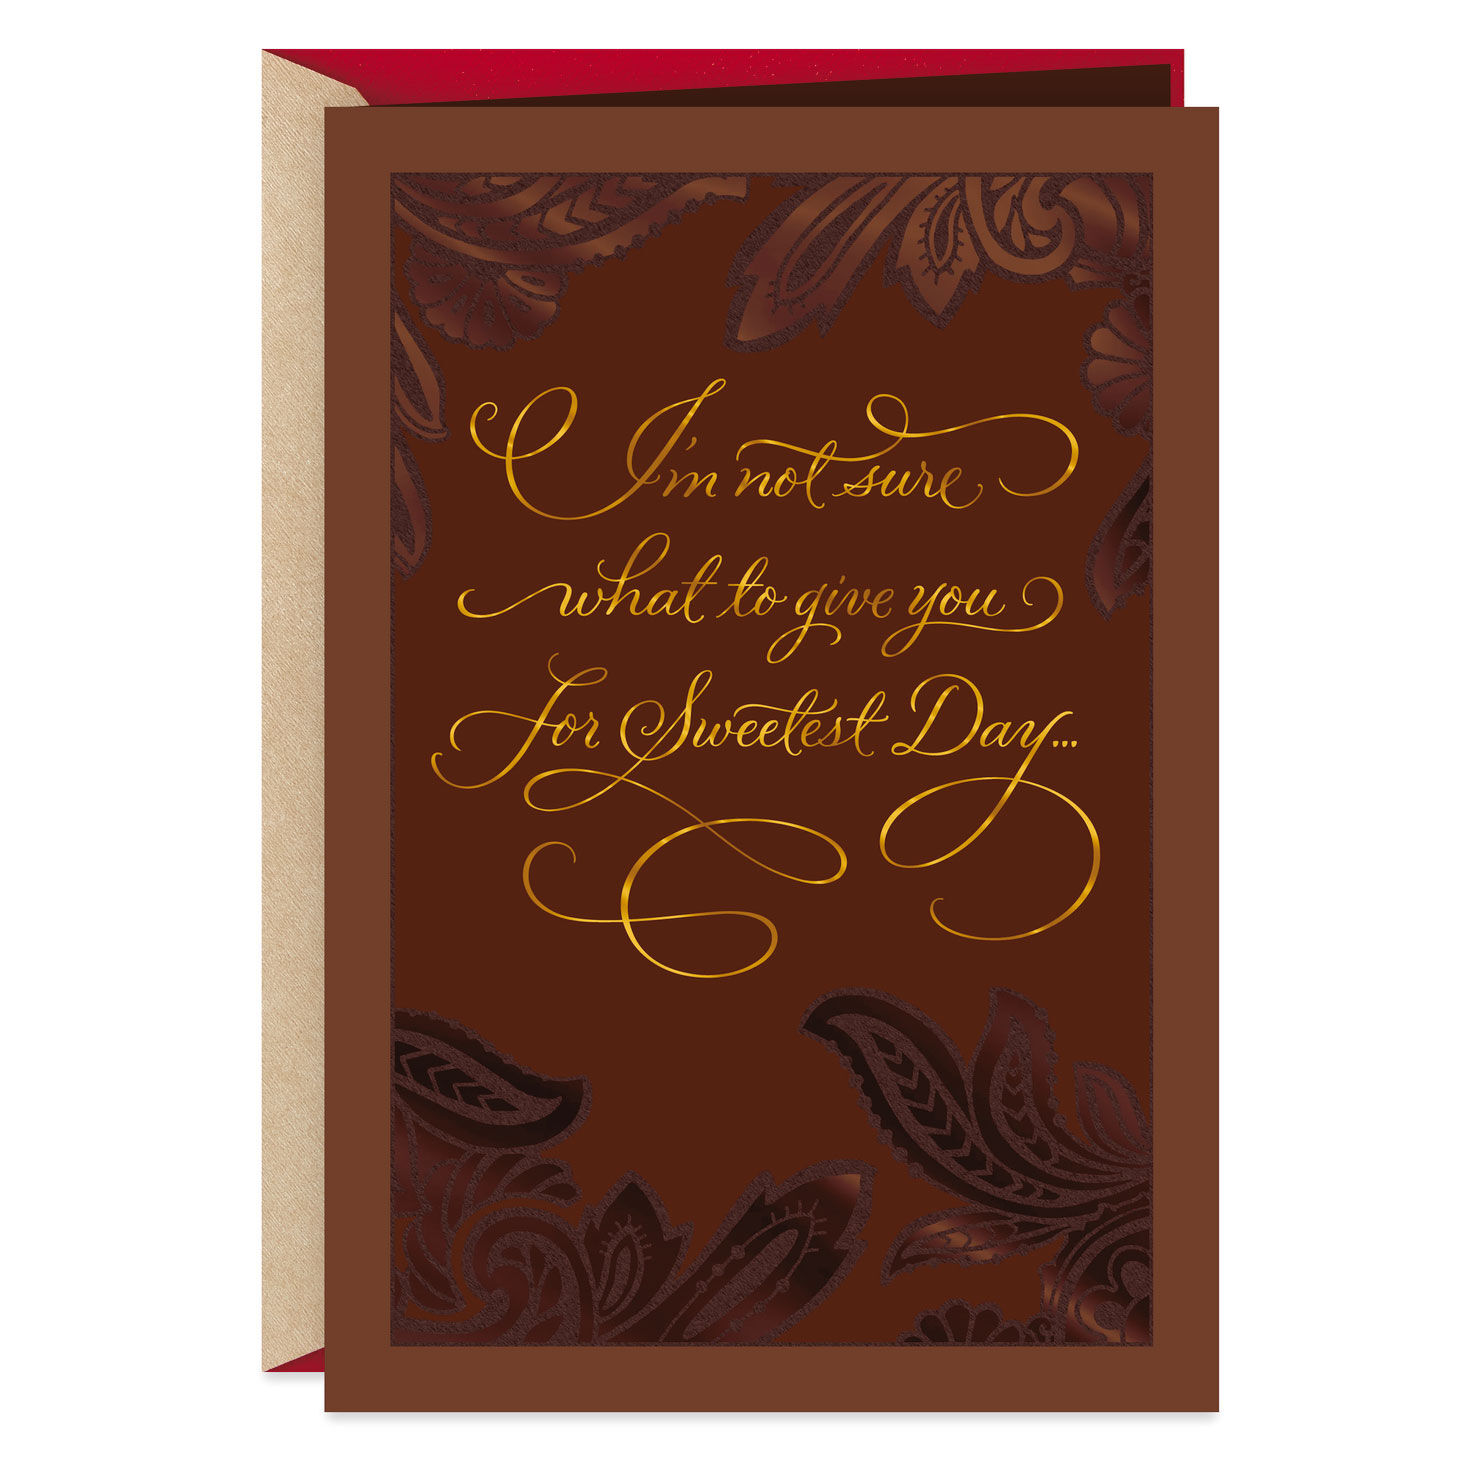 Hallmark Sweetest Day Card for Husband Love Being Married to You 